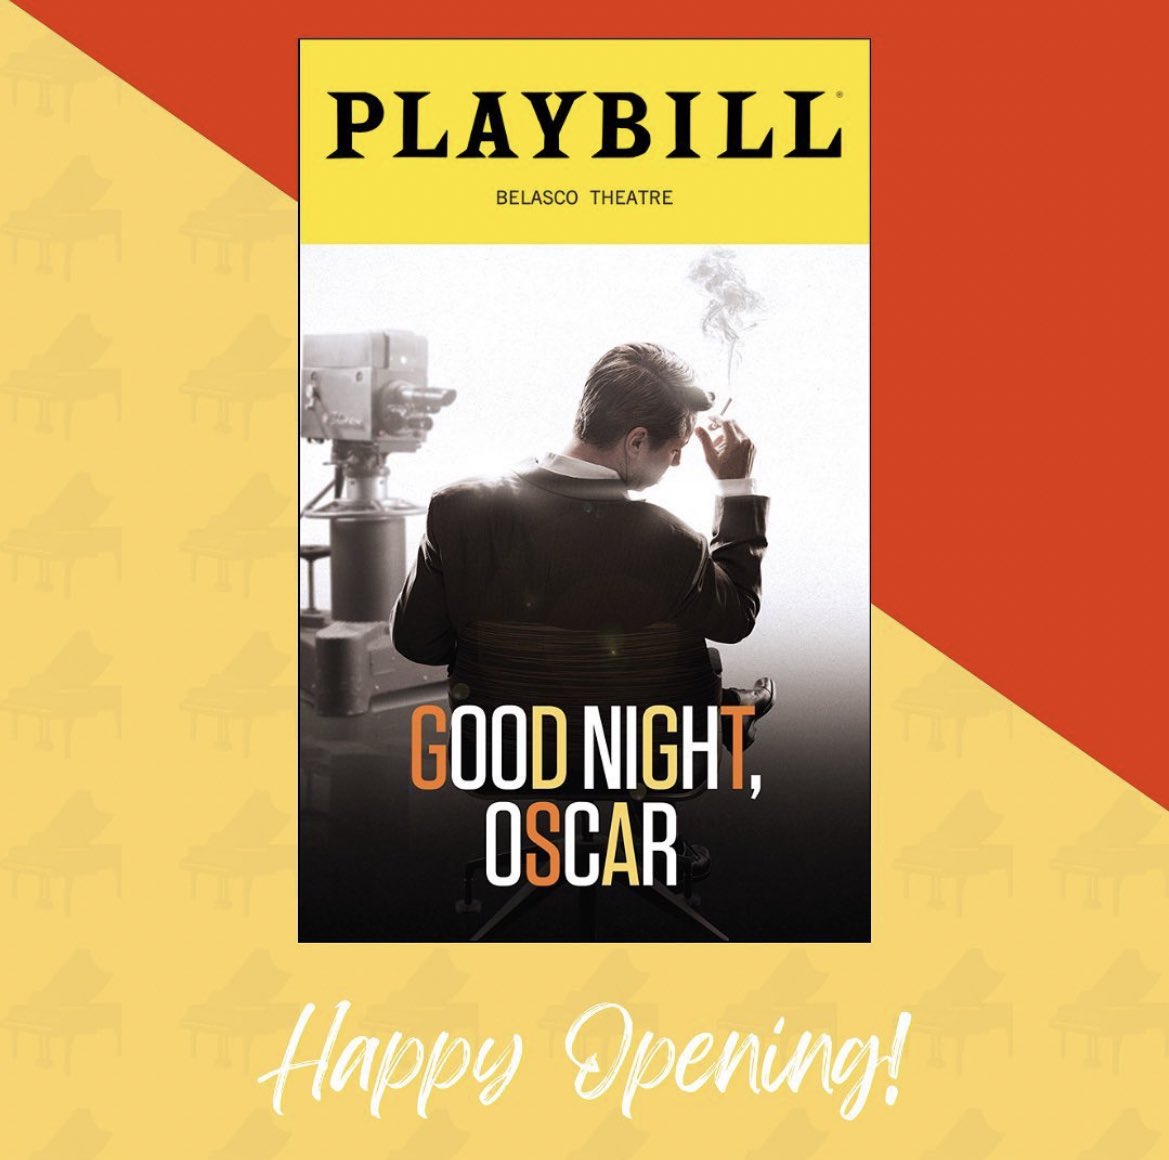 Welcome to Broadway! @goodnightoscar 🎹 🥂 #aboutlastnight 

#nyc #opening #seanhayes #broadway #theatre #happyopening #goodnightoscar #oscarlevant